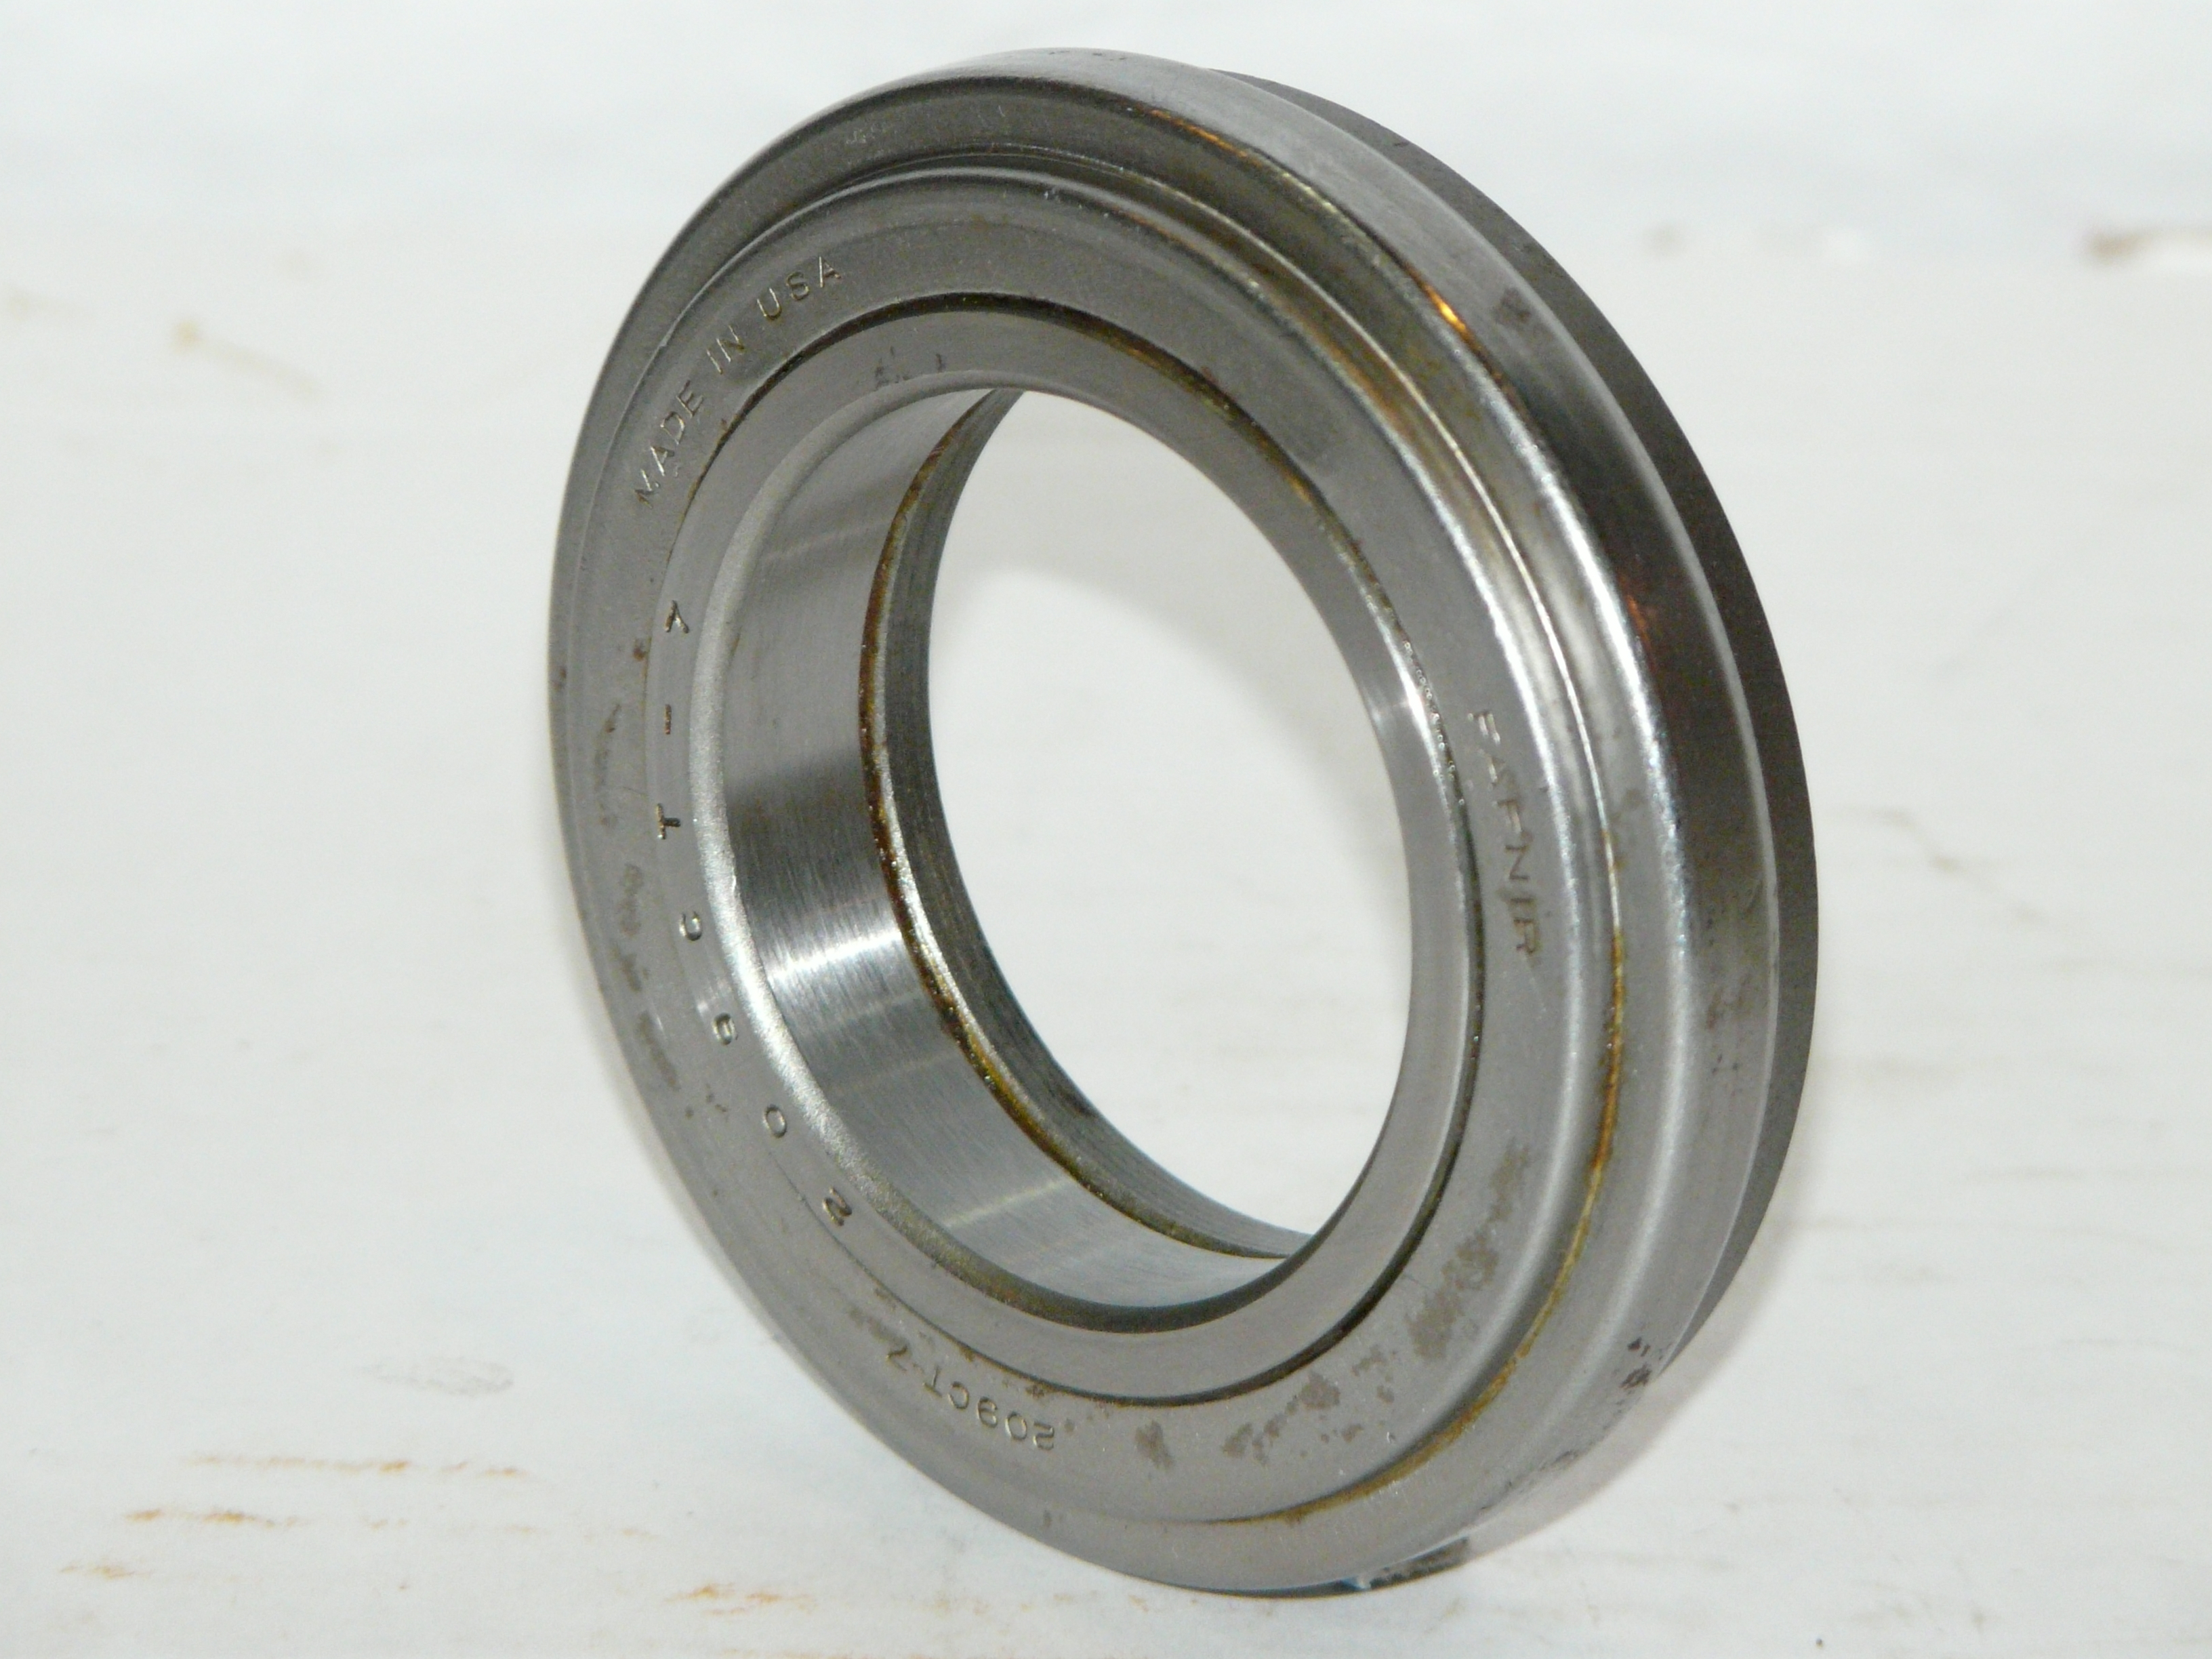 01876 Clutch Release Throwout Bearing